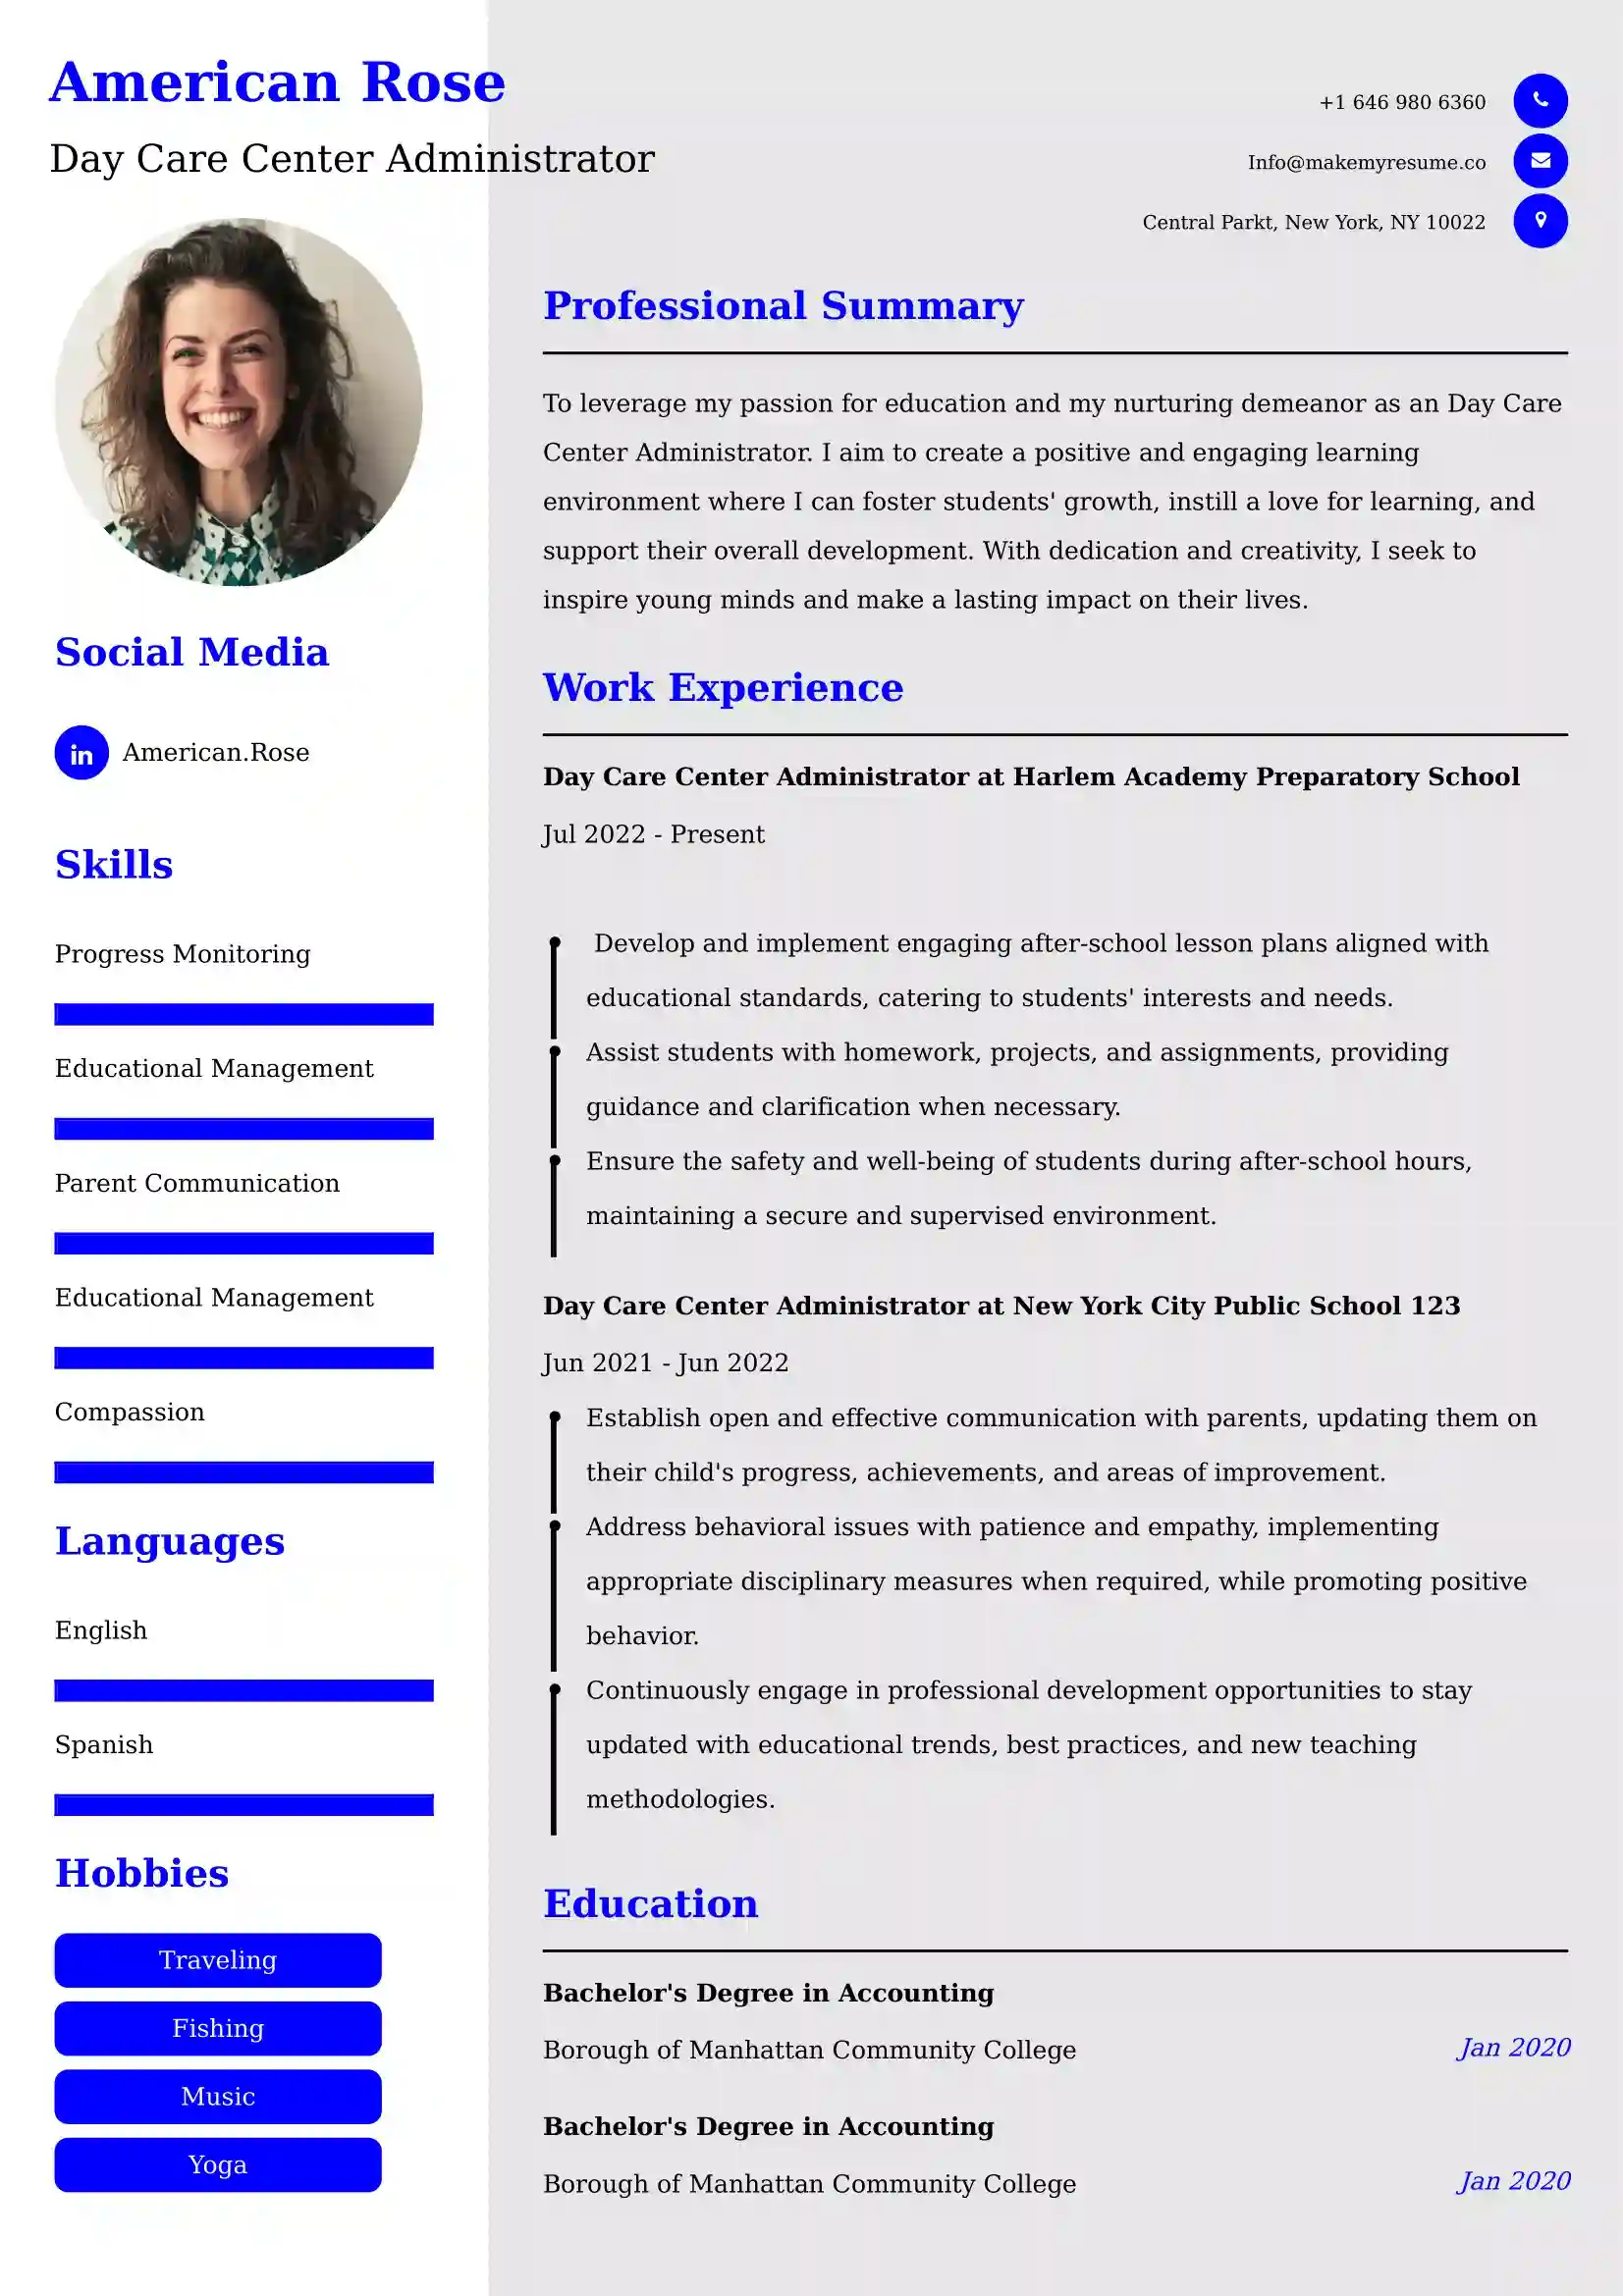 Day Care Center Administrator Resume Examples - Brazilian Format, Latest Template